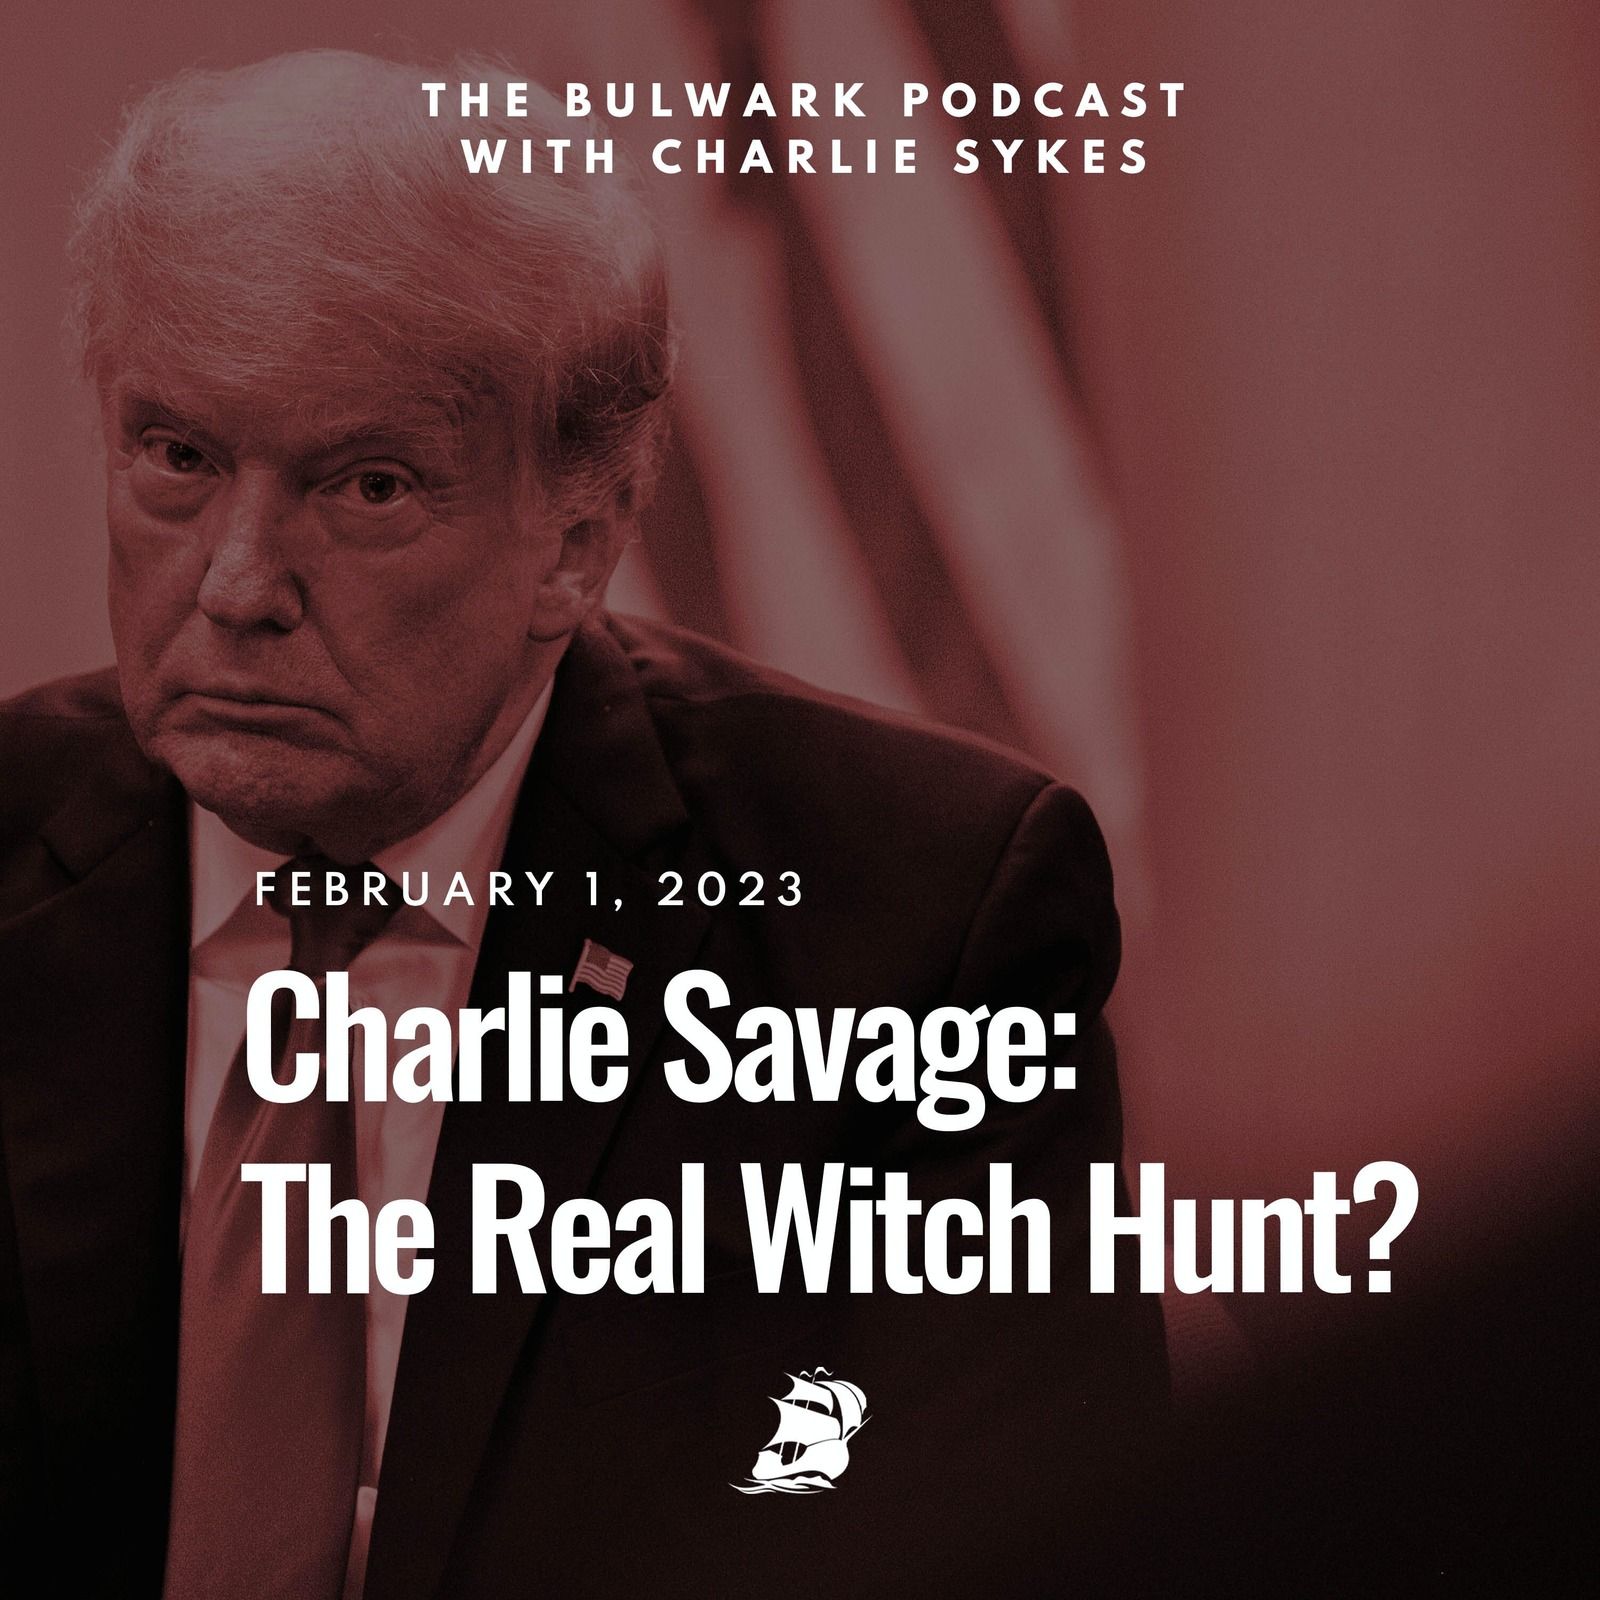 Charlie Savage: The Real Witch Hunt?